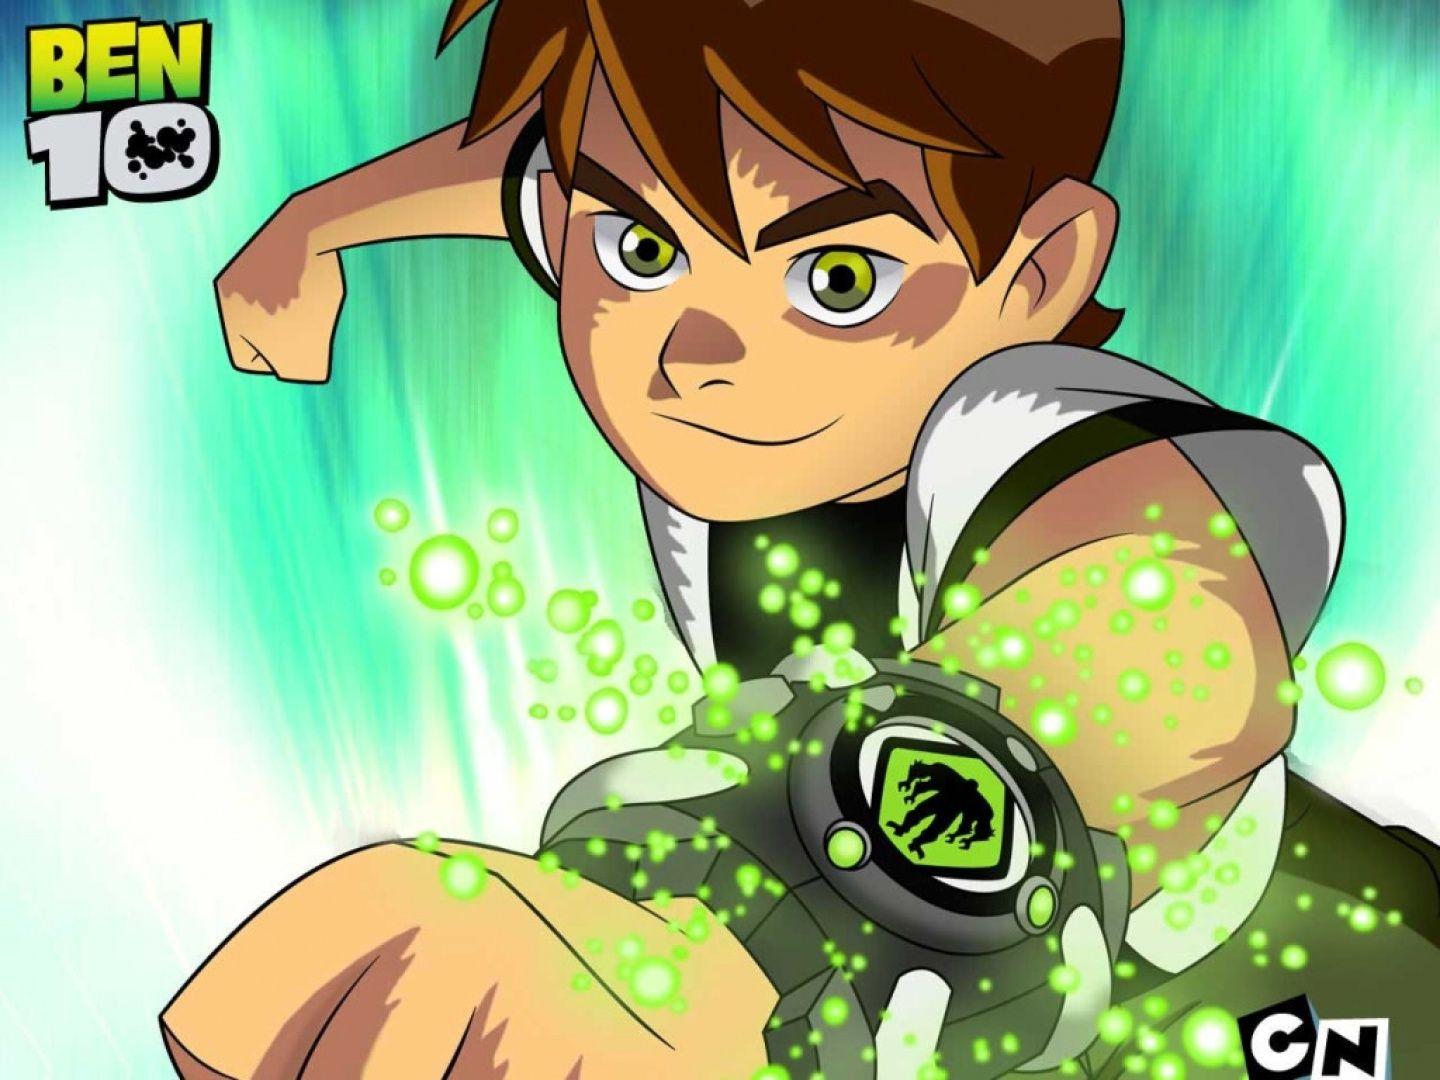 ben 10. Free Ben 10 posters and wallpaper to download. Daily